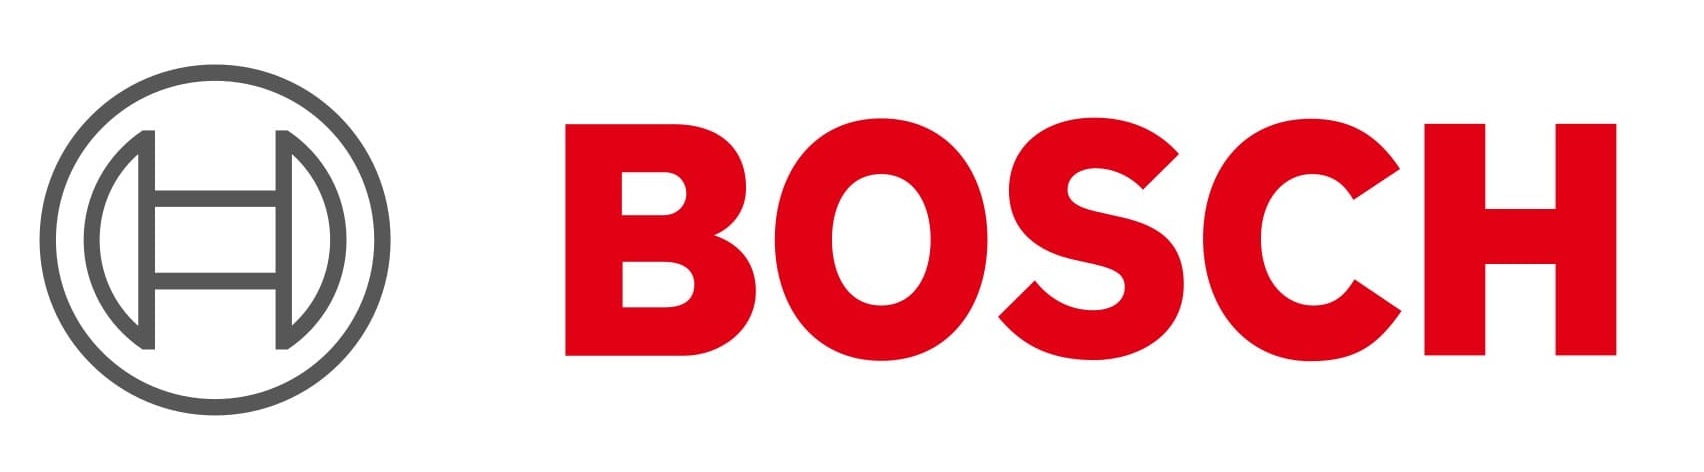 BOSCH Stoves Oven Repairs, Kenmore Stoves Oven Repairs